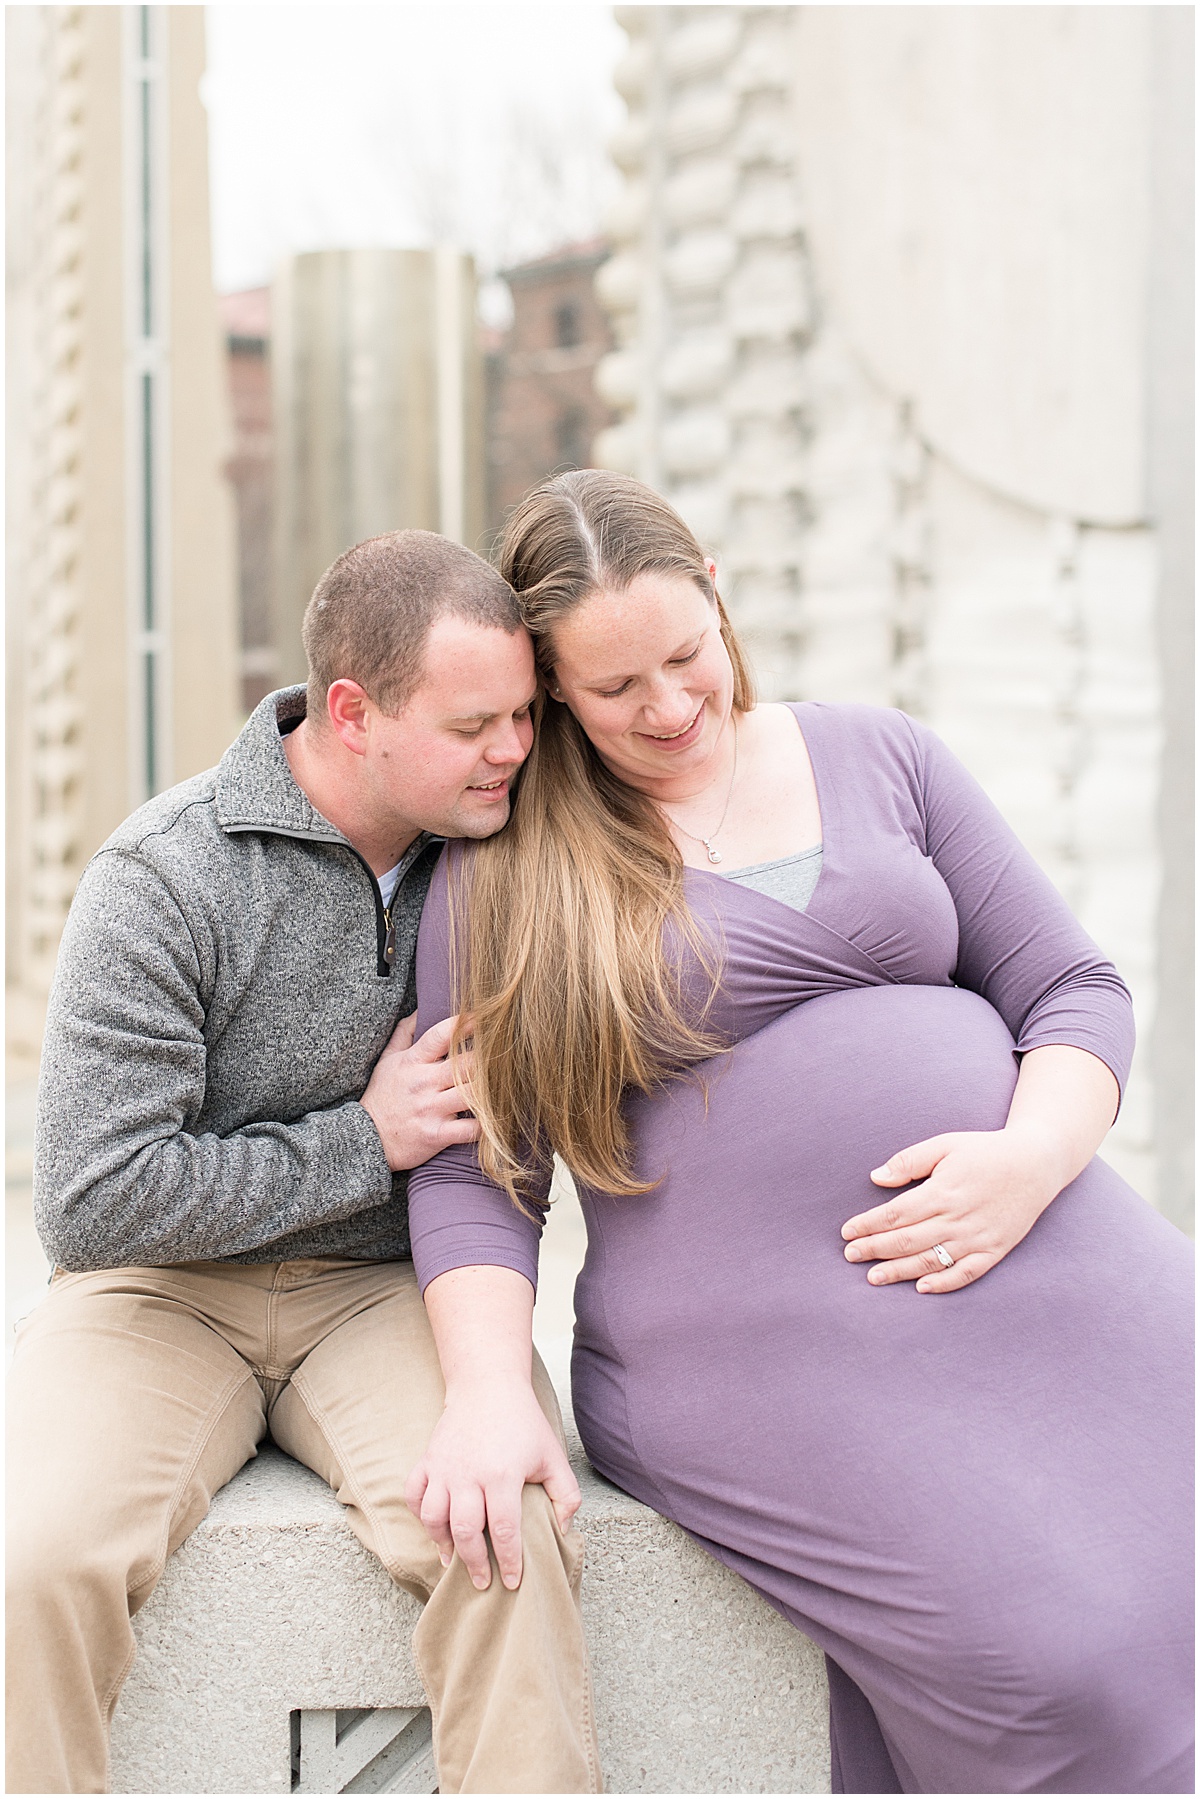 Winter Purdue University maternity photos in West Lafayette, Indiana